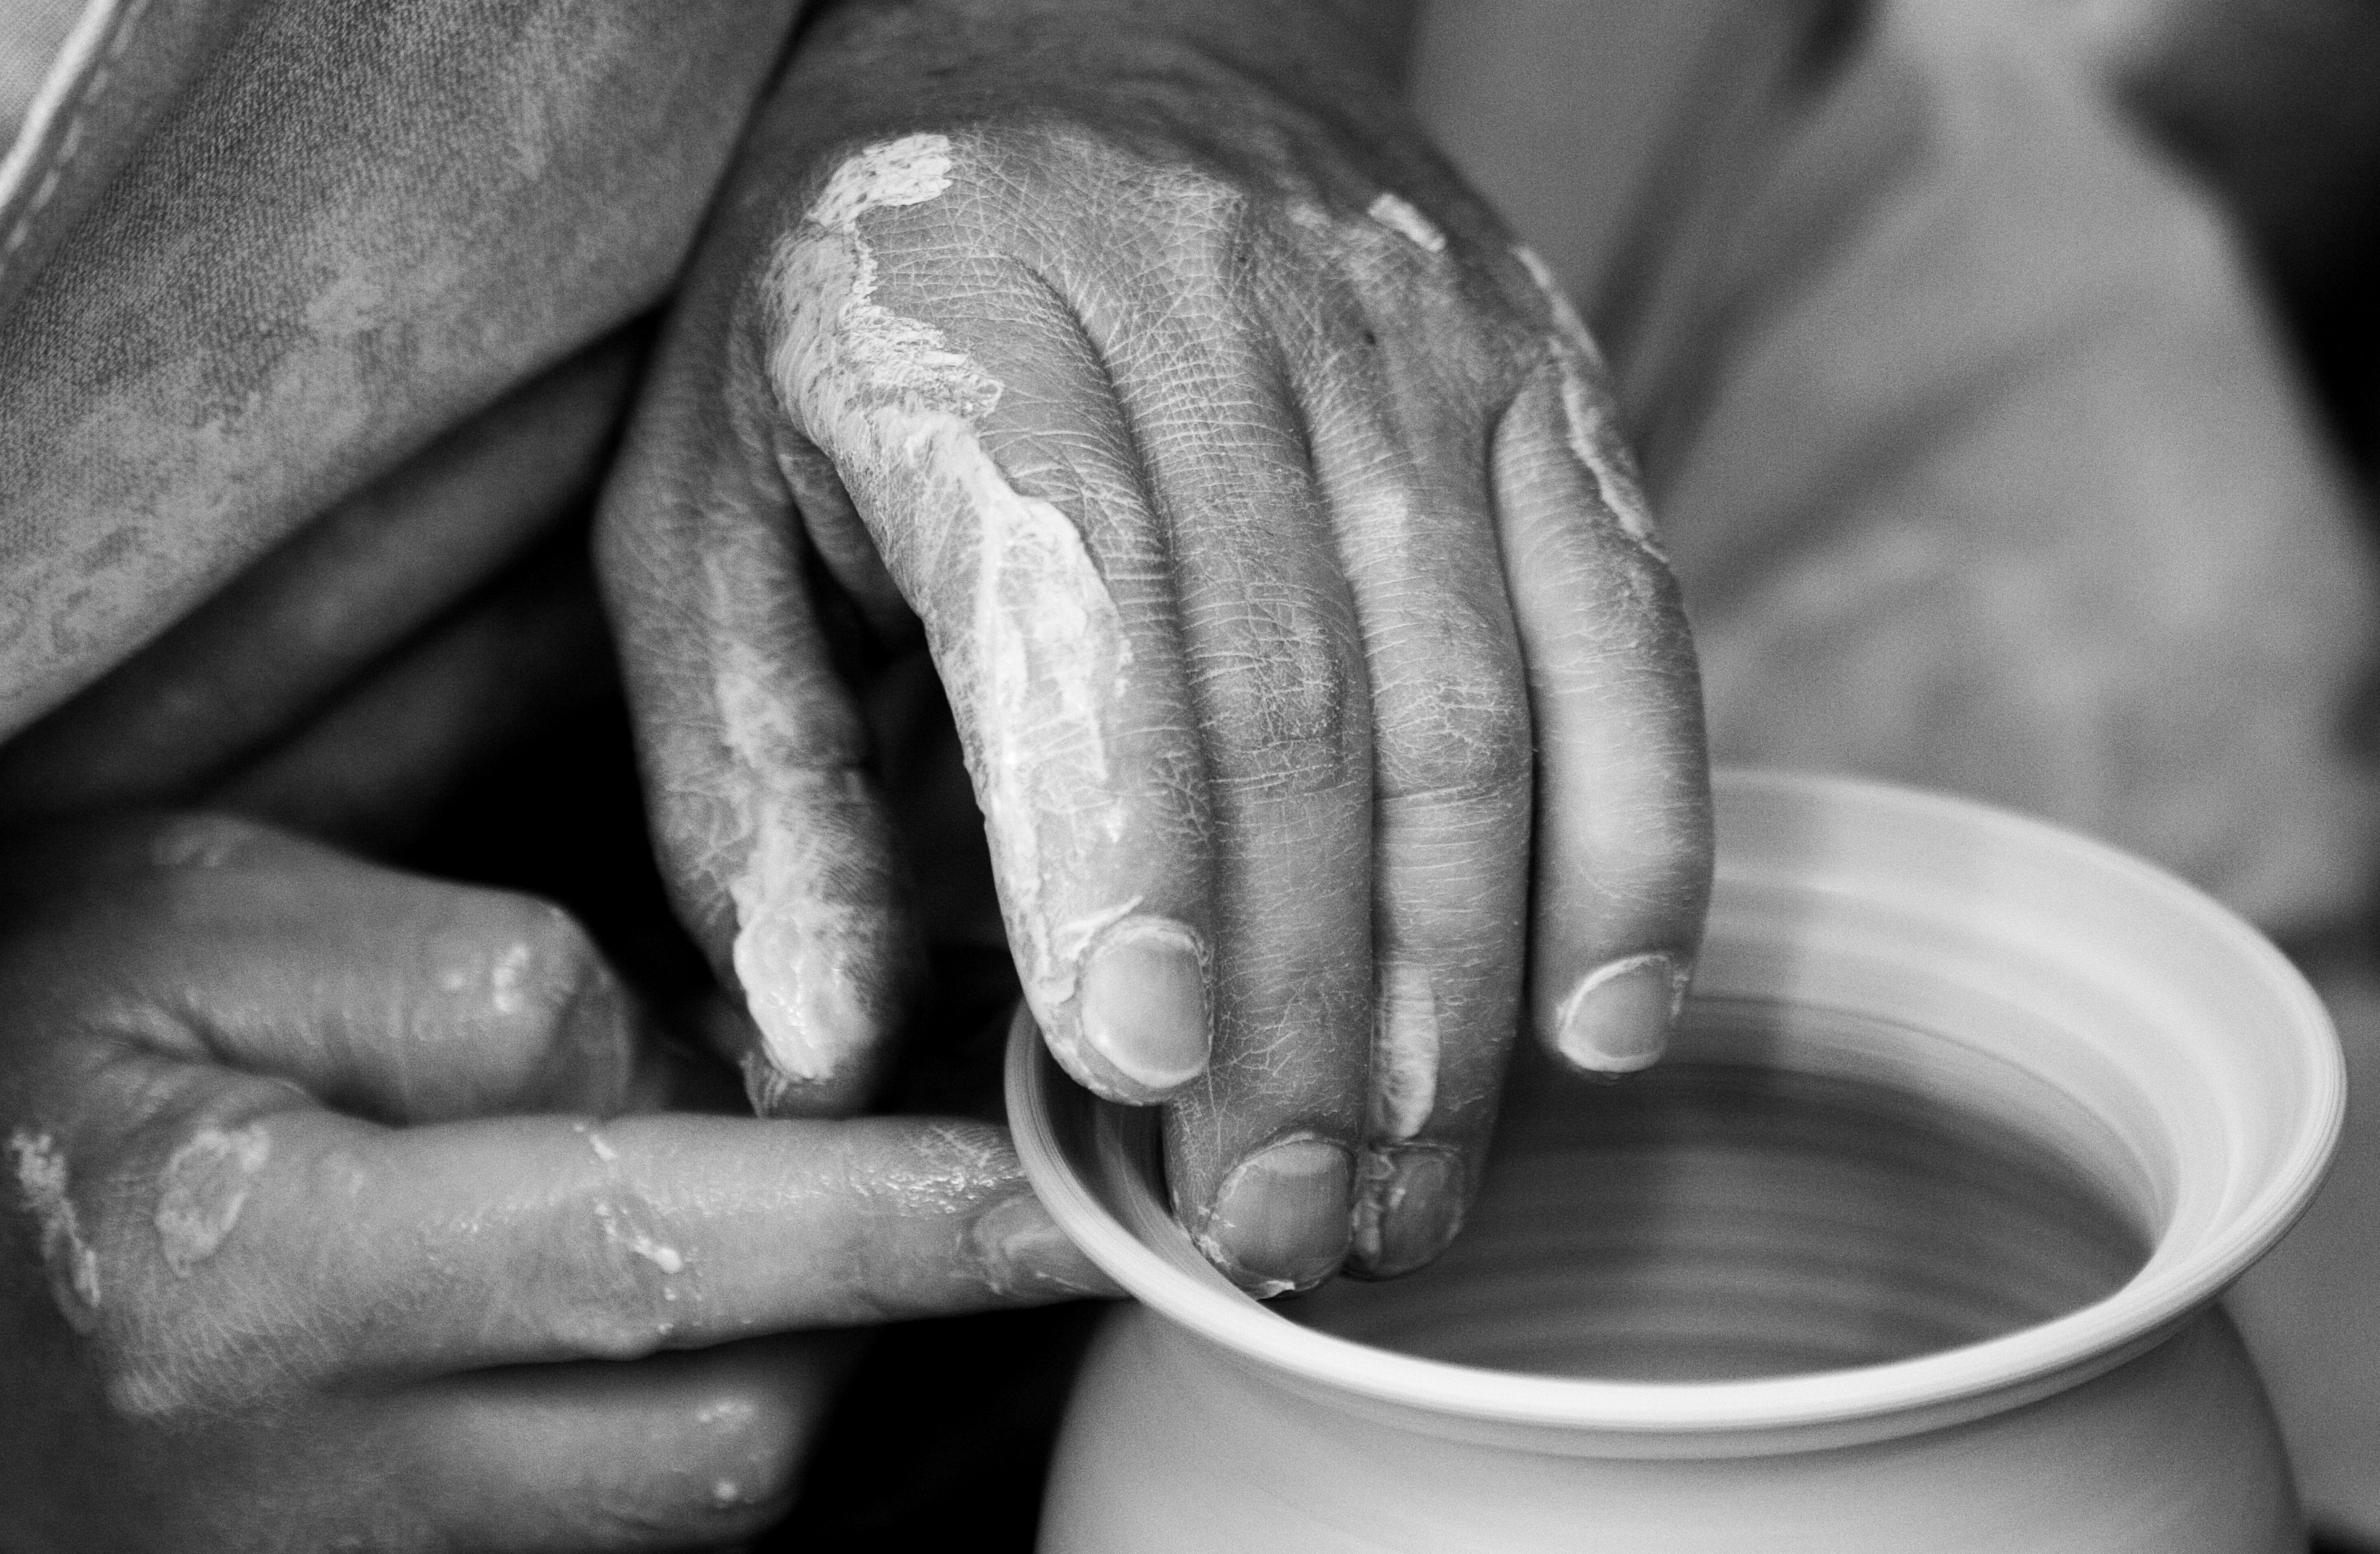 A photo of a person's hands shaping a piece of pottery on a pottery wheel. The clay is wet and messy, and the potter's hands are covered in it. The pottery wheel is turning, and there are tools and other pots visible in the background. This image could relate to the therapeutic process of DBT therapy in Connecticut, which can involve molding and shaping new ways of thinking and behavior.